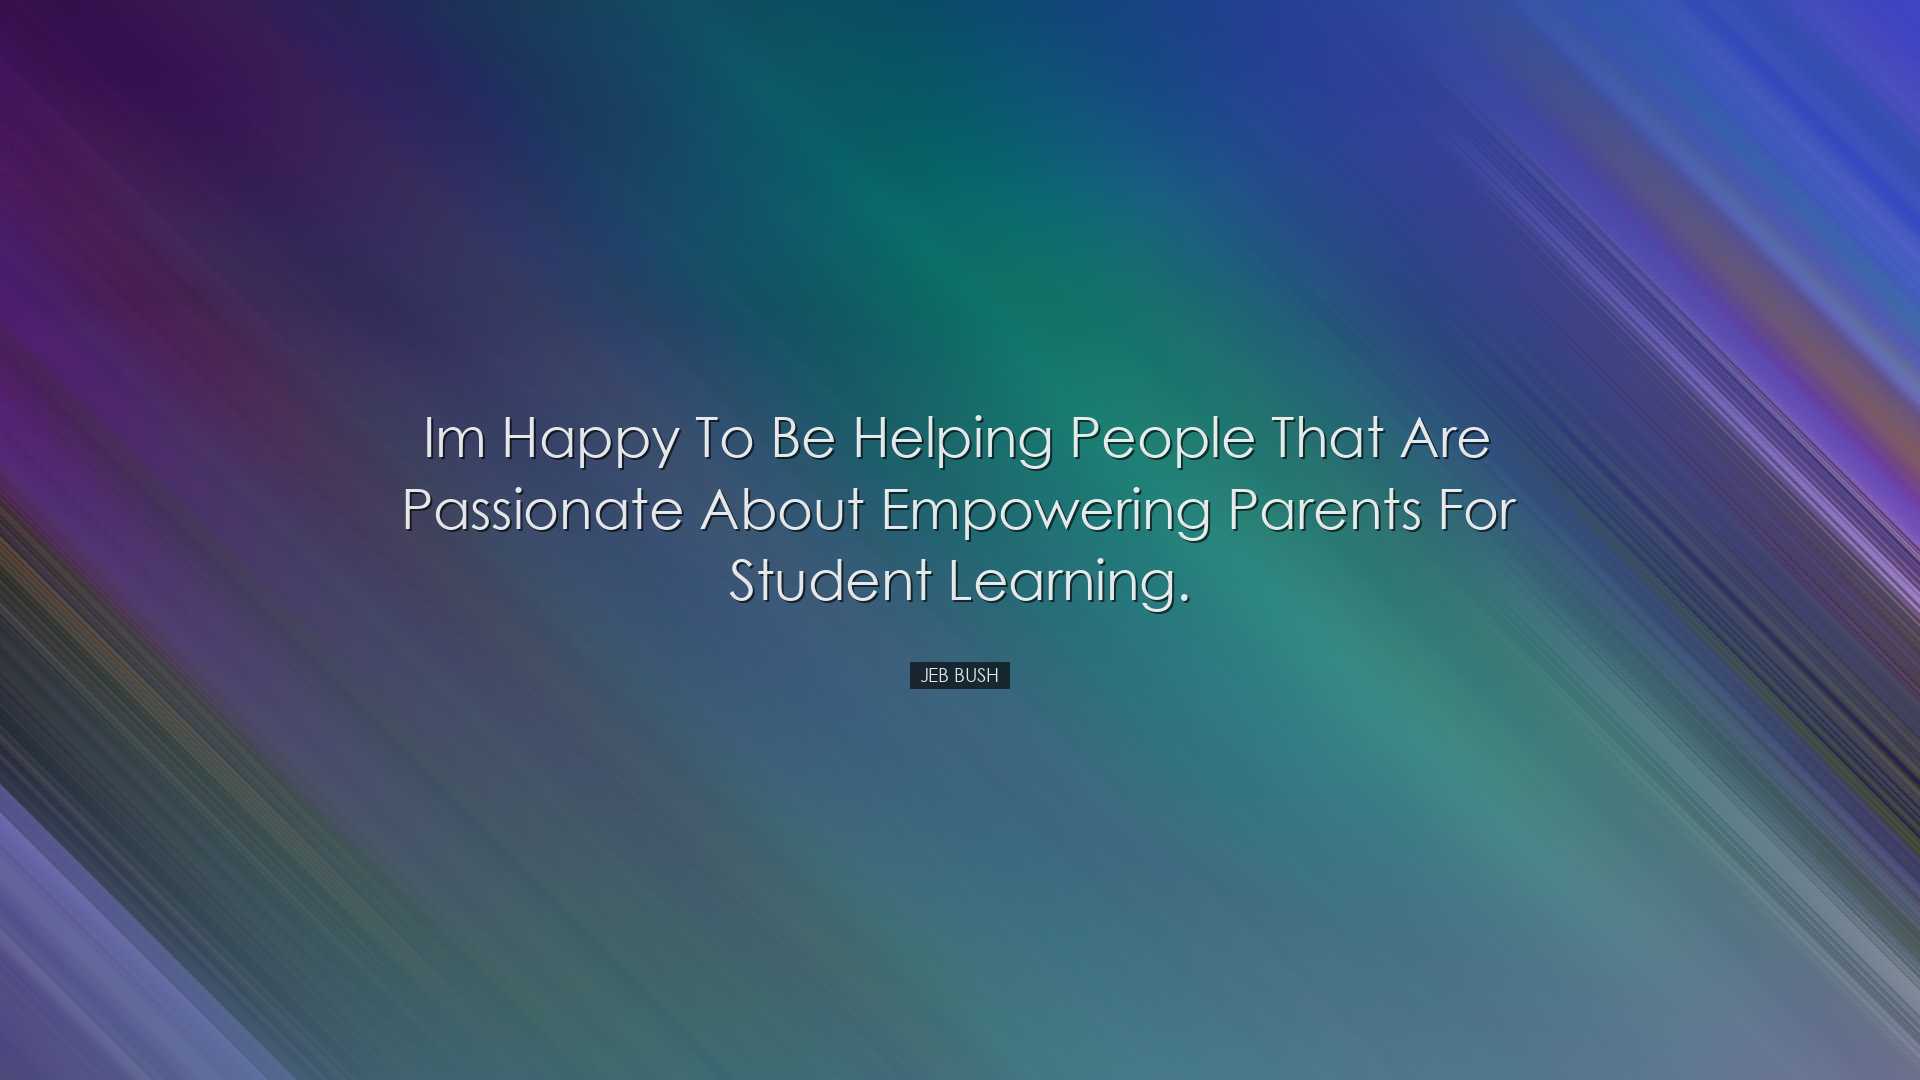 Im happy to be helping people that are passionate about empowering